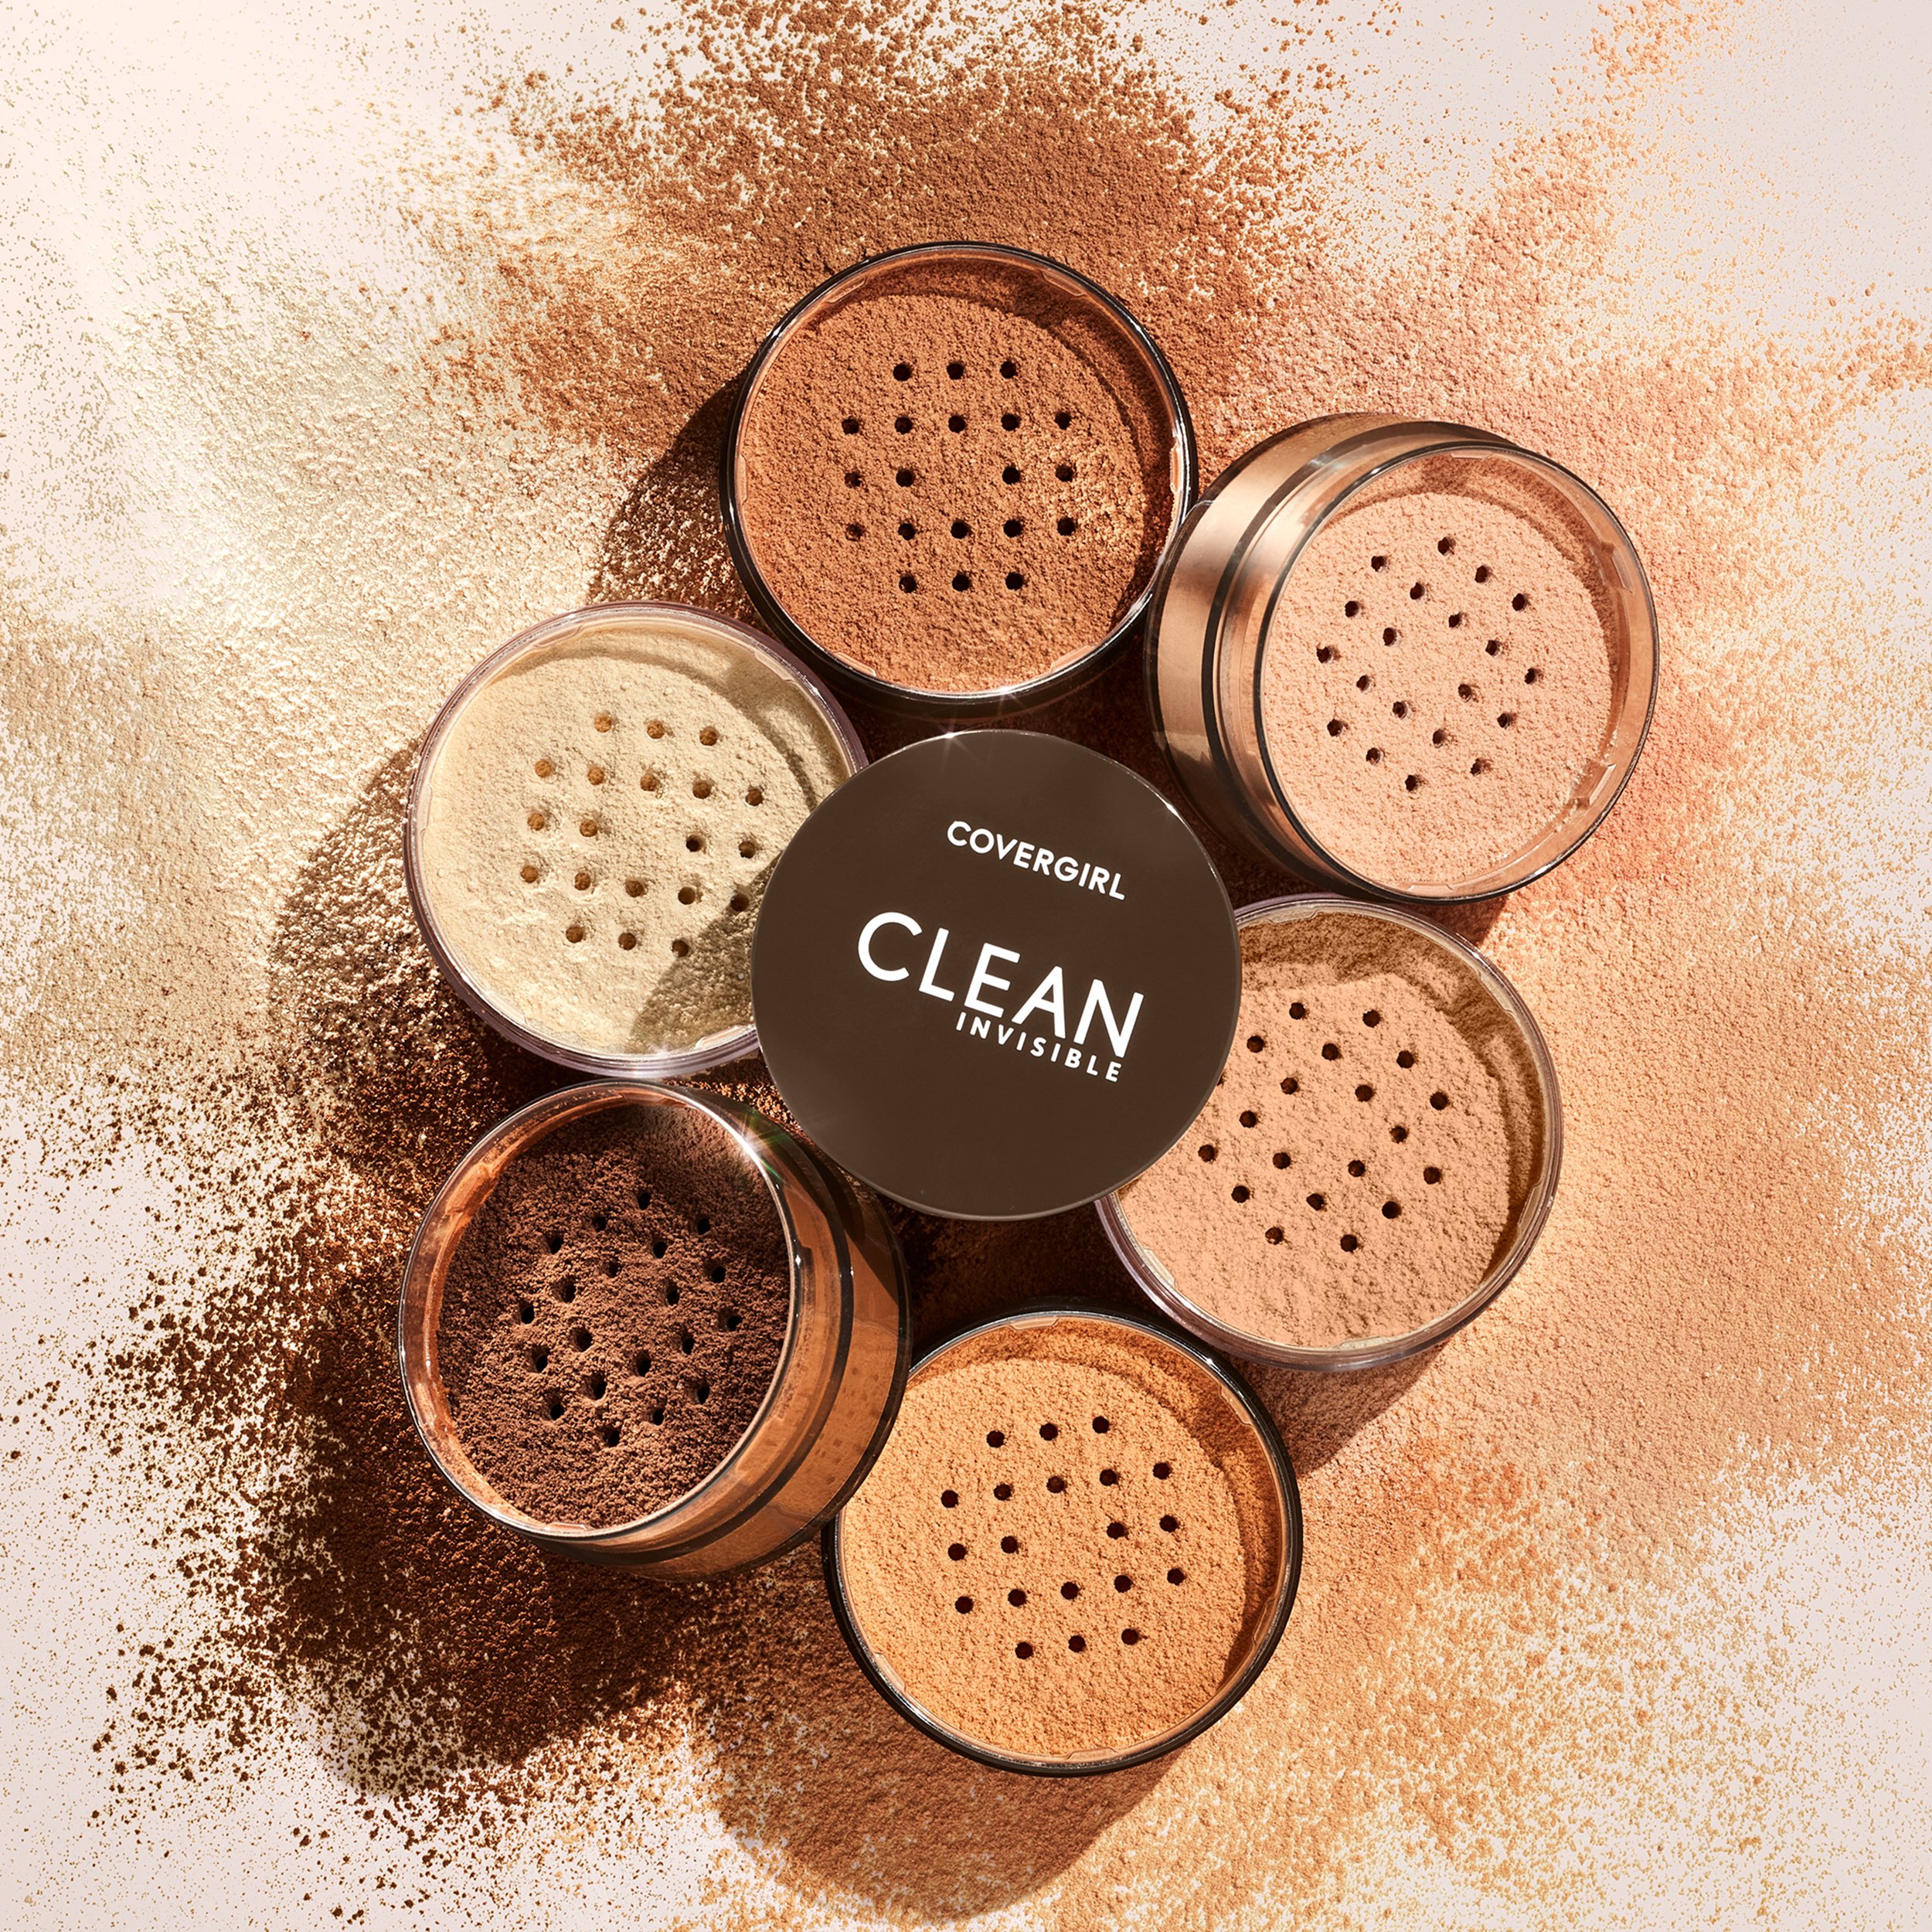 Clean Invisible Pressed Powder